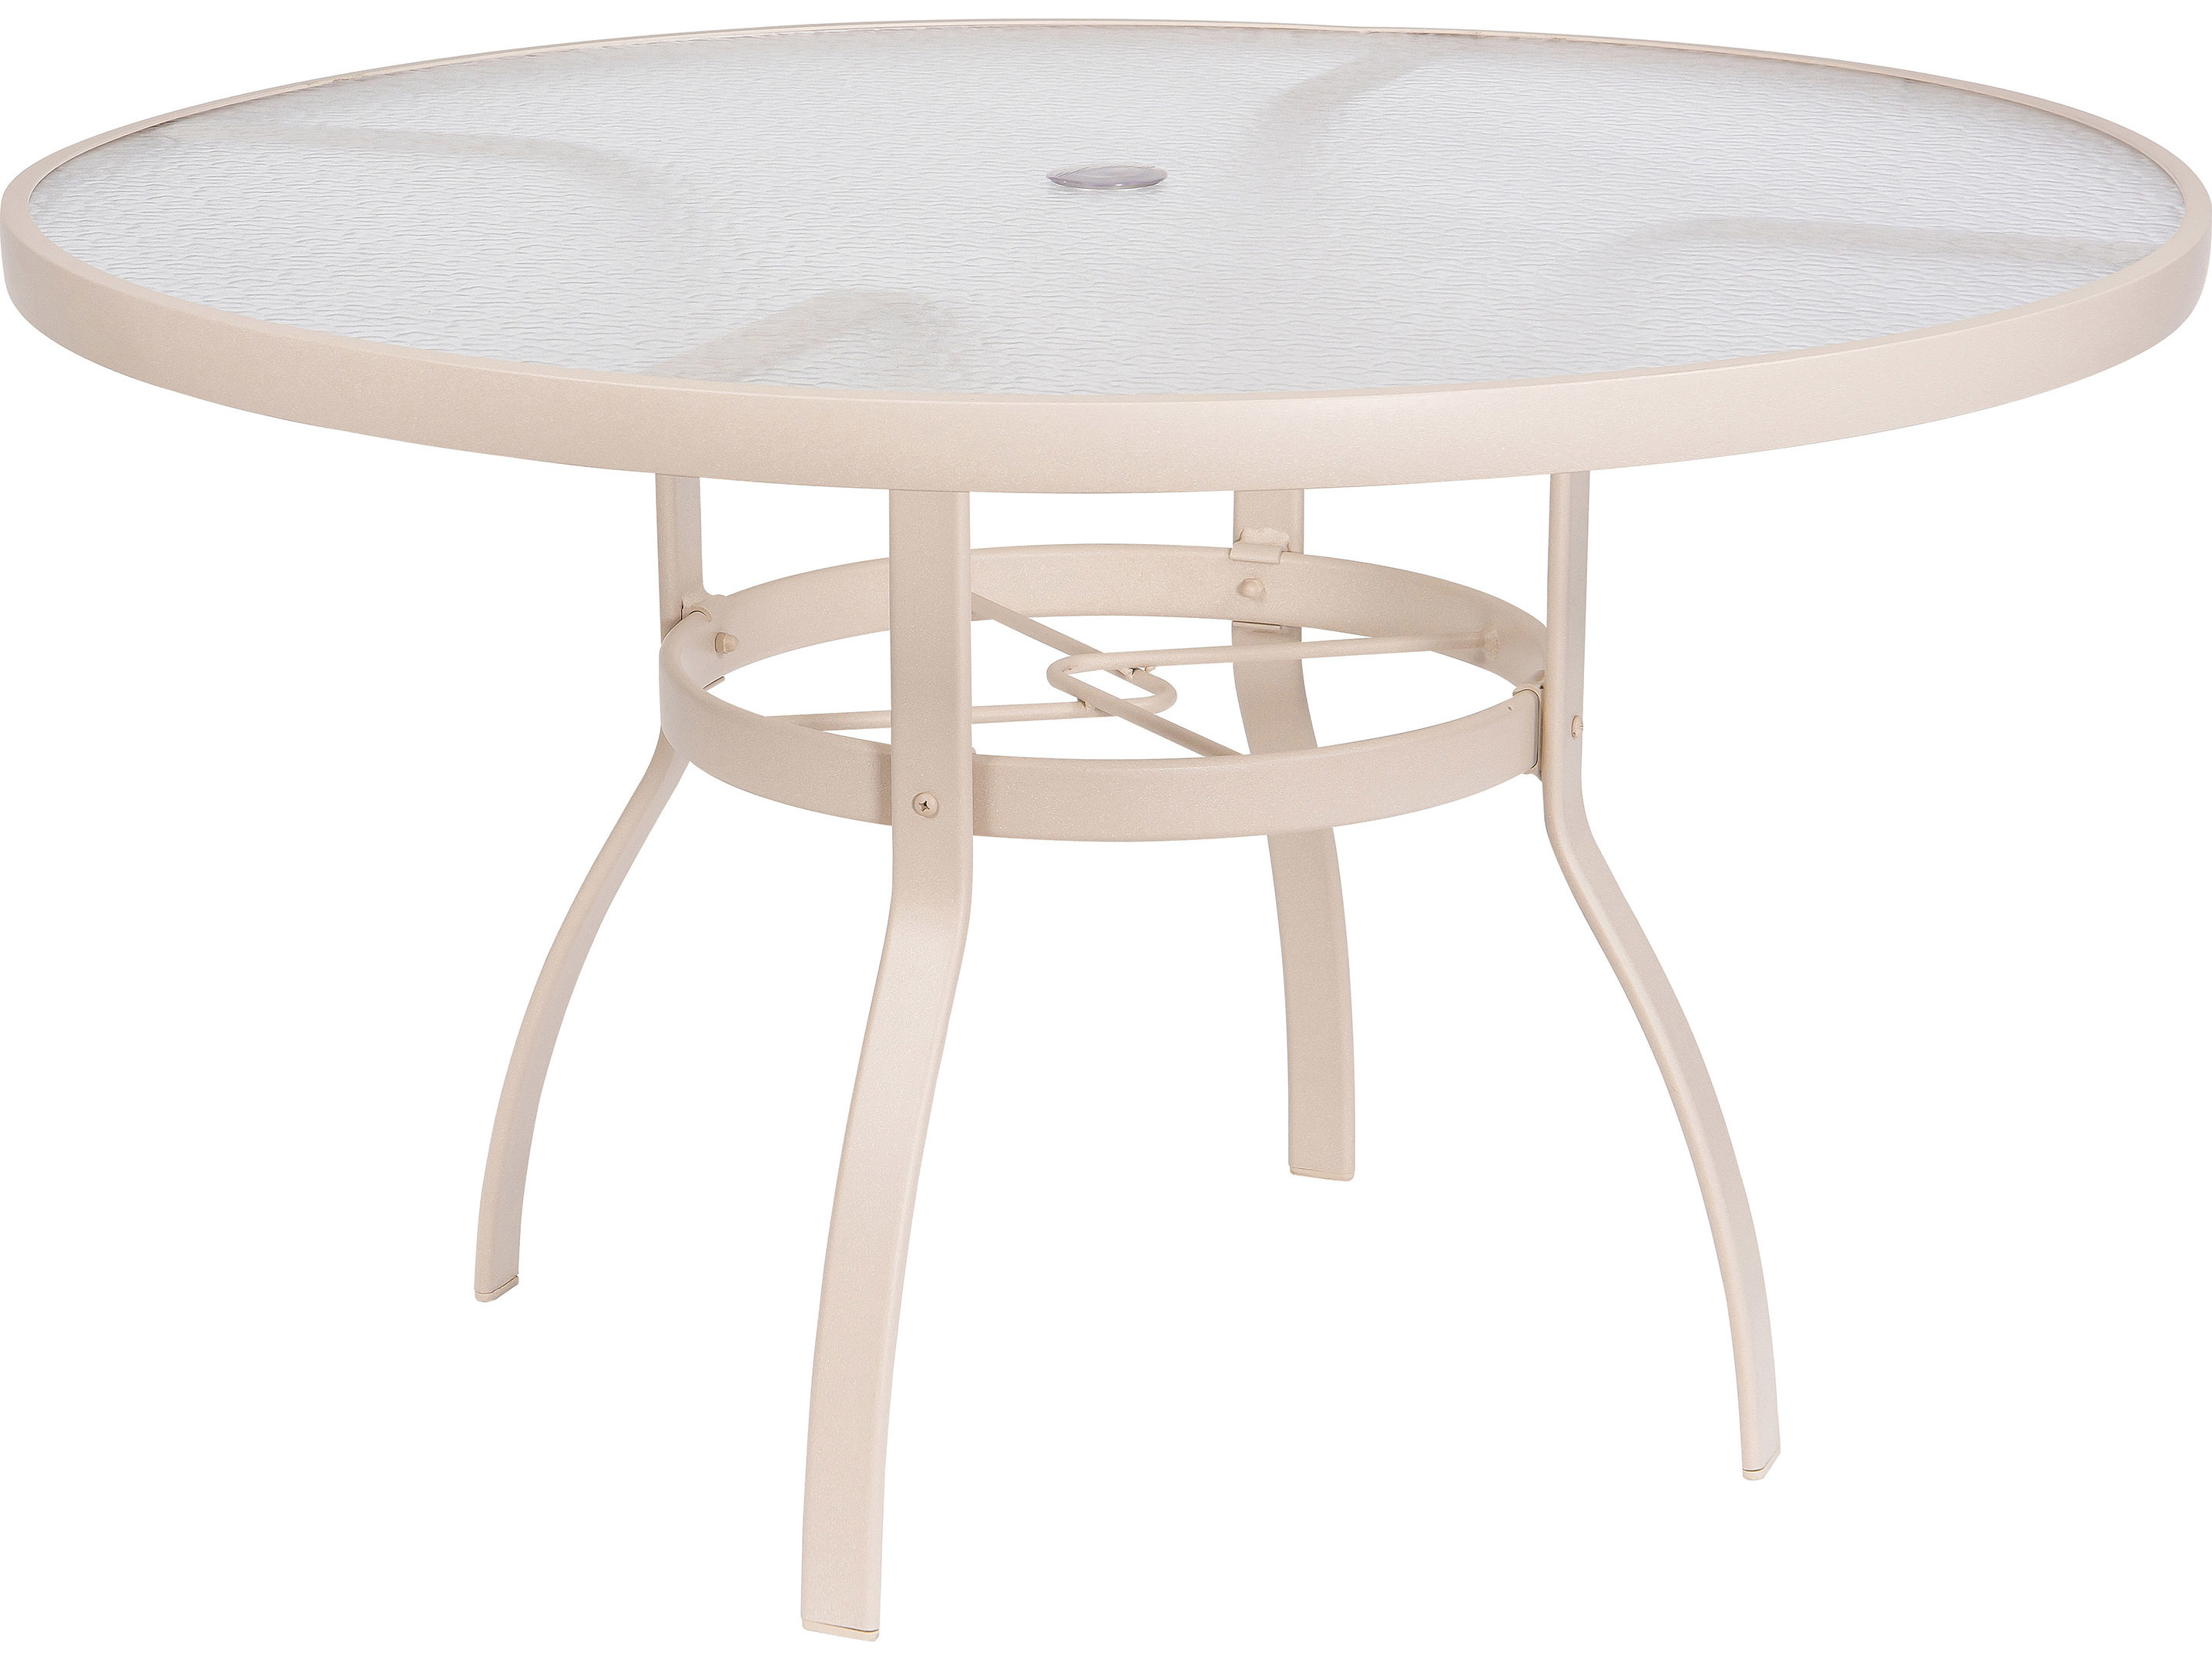 Woodard Deluxe Aluminum Sandstone 48 Round Acrylic Top Table with ...